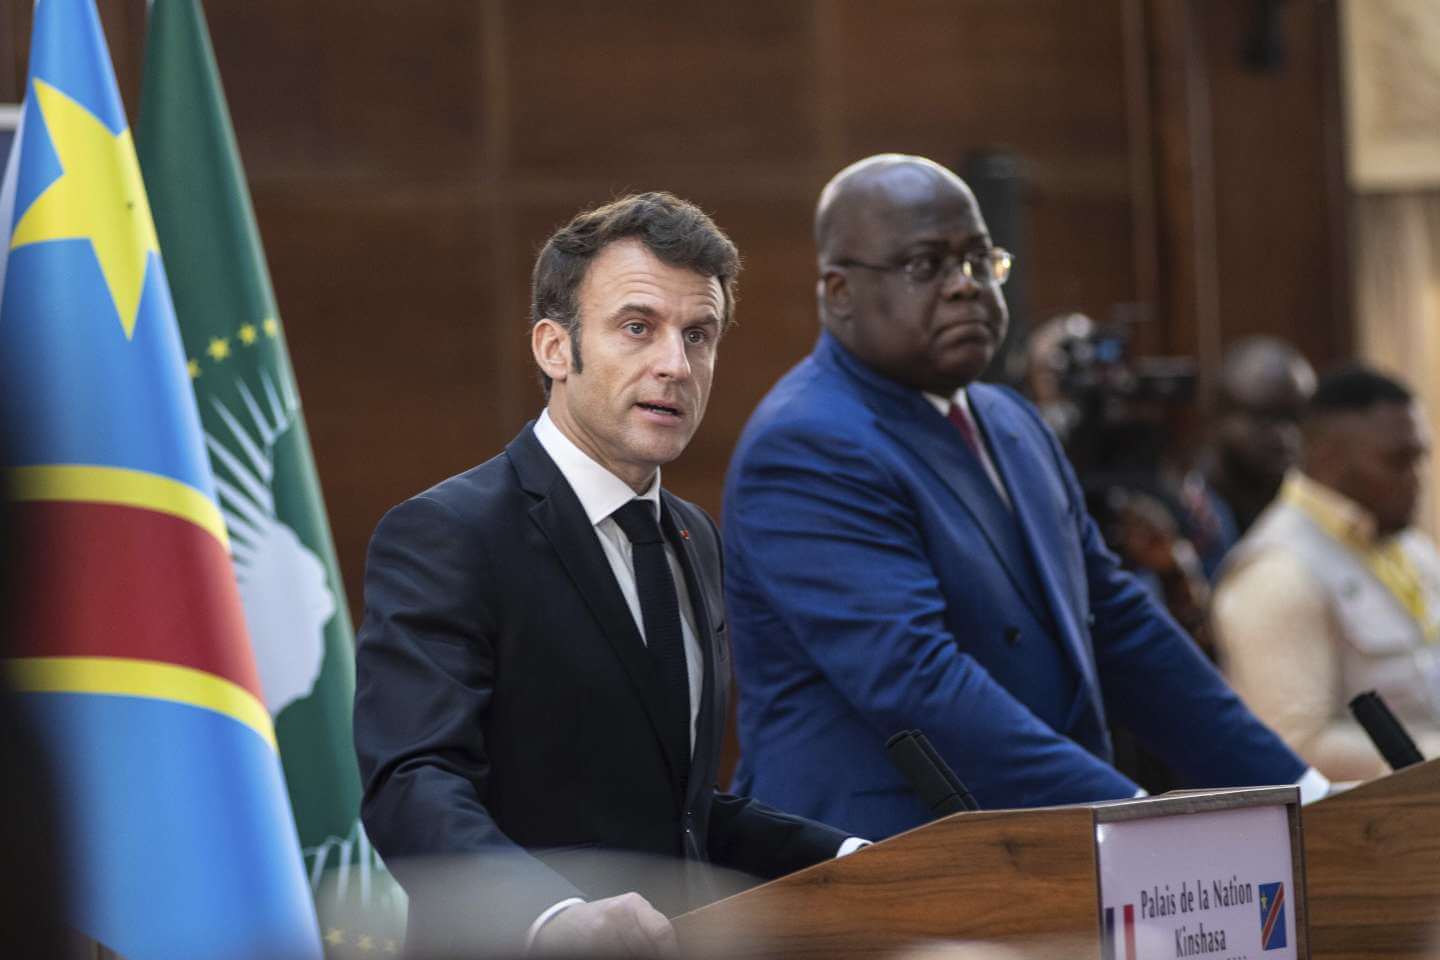 EU to invest €50 million in infrastructure and mining in DRC